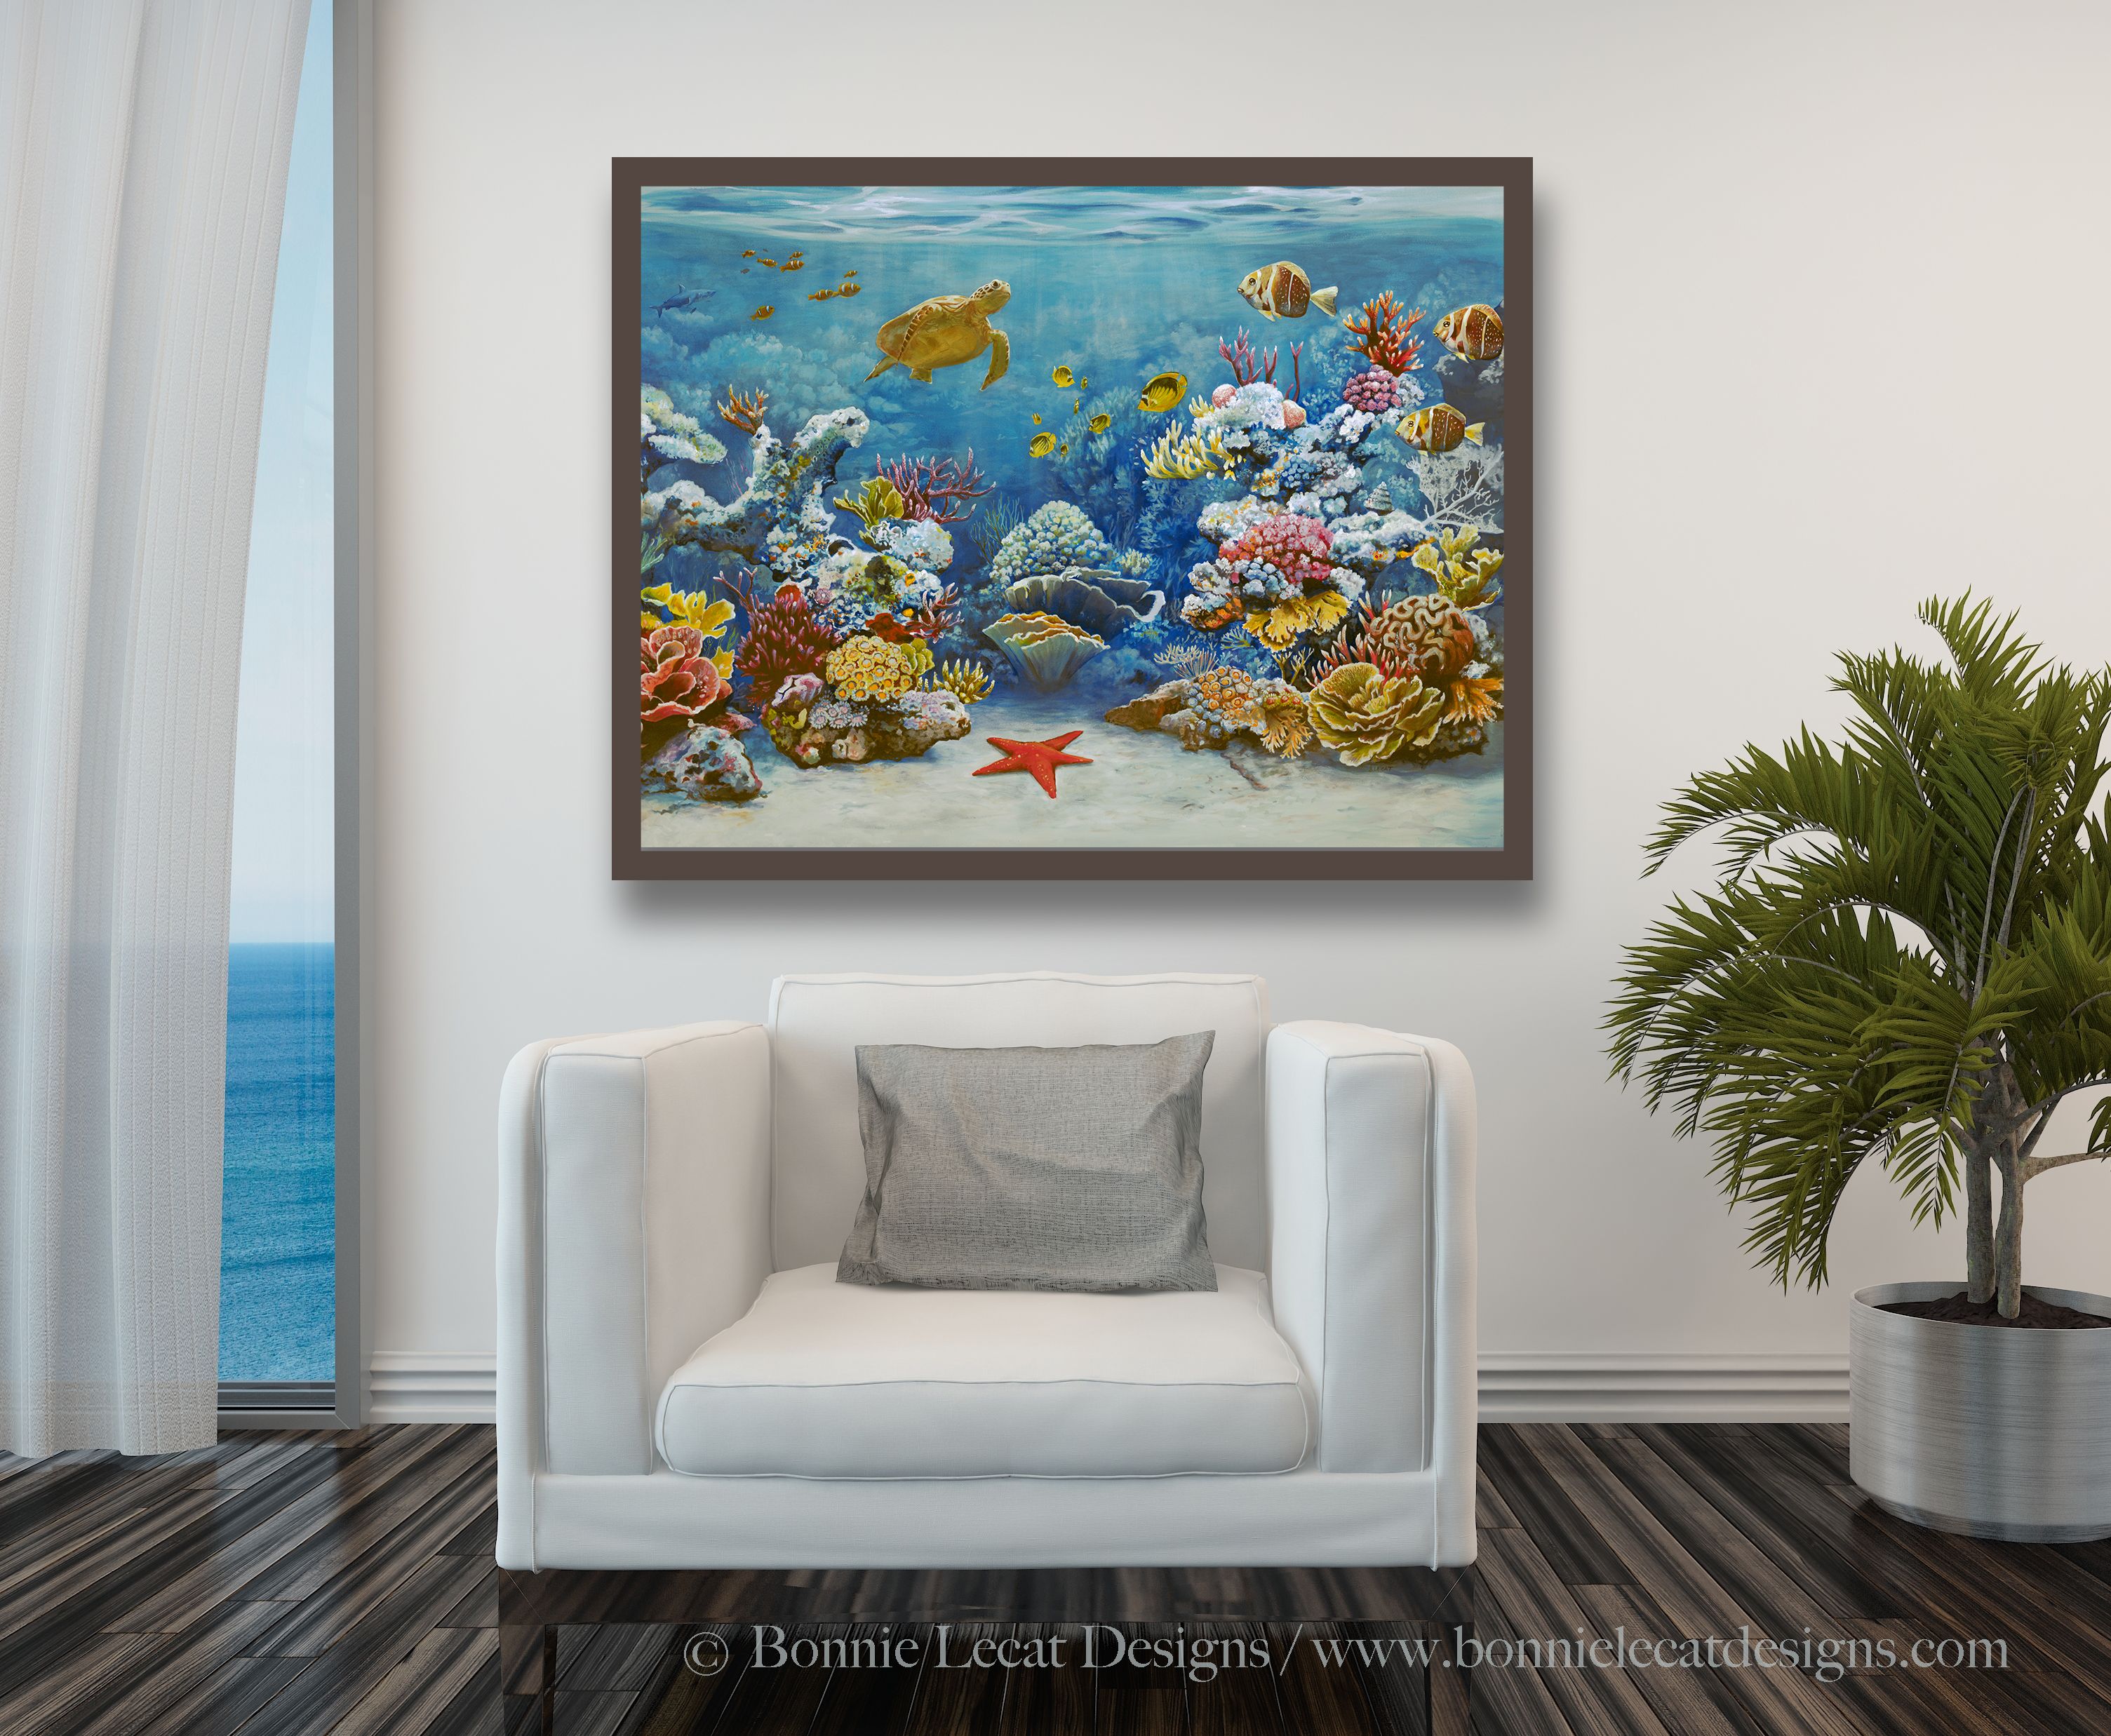 Buy Handmade Coral Reef Mural, made to order from Bonnie Lecat Designs ...